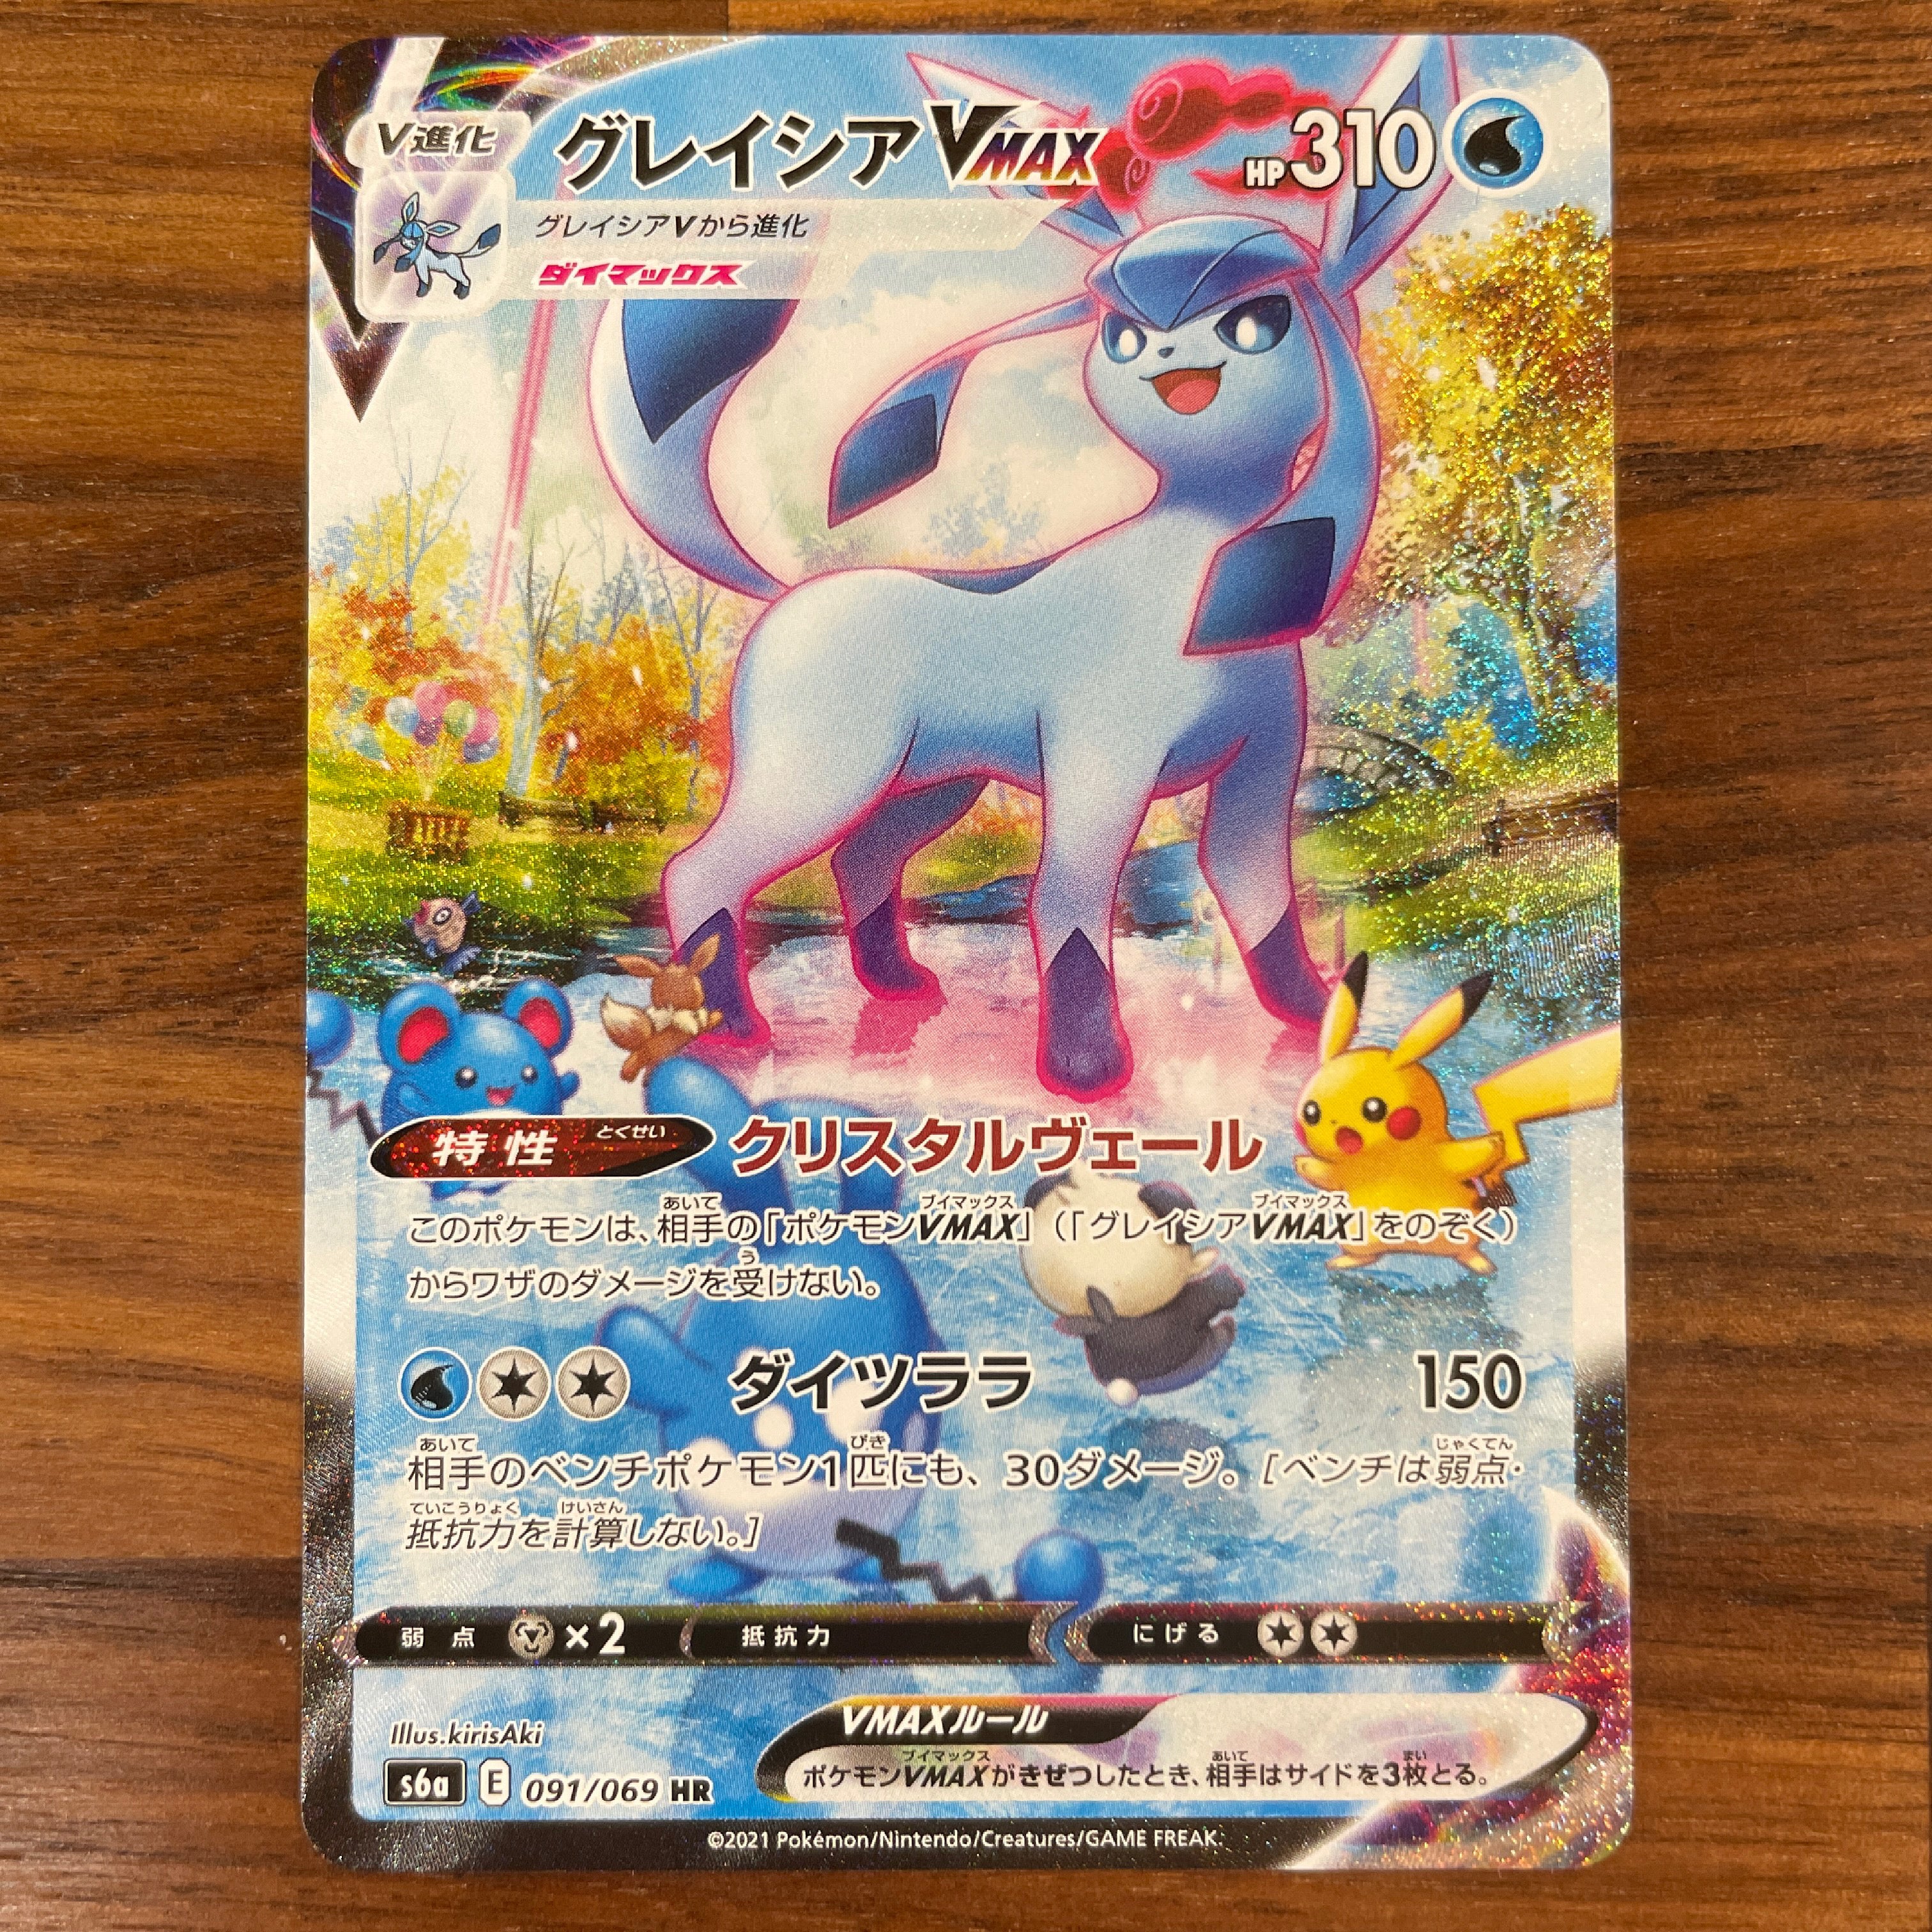 POKÉMON CARD GAME Sword & Shield Expansion pack ｢Eevee Heroes｣  POKÉMON CARD GAME s6a 091/069 Hyper Rare card  Glaceon VMAX